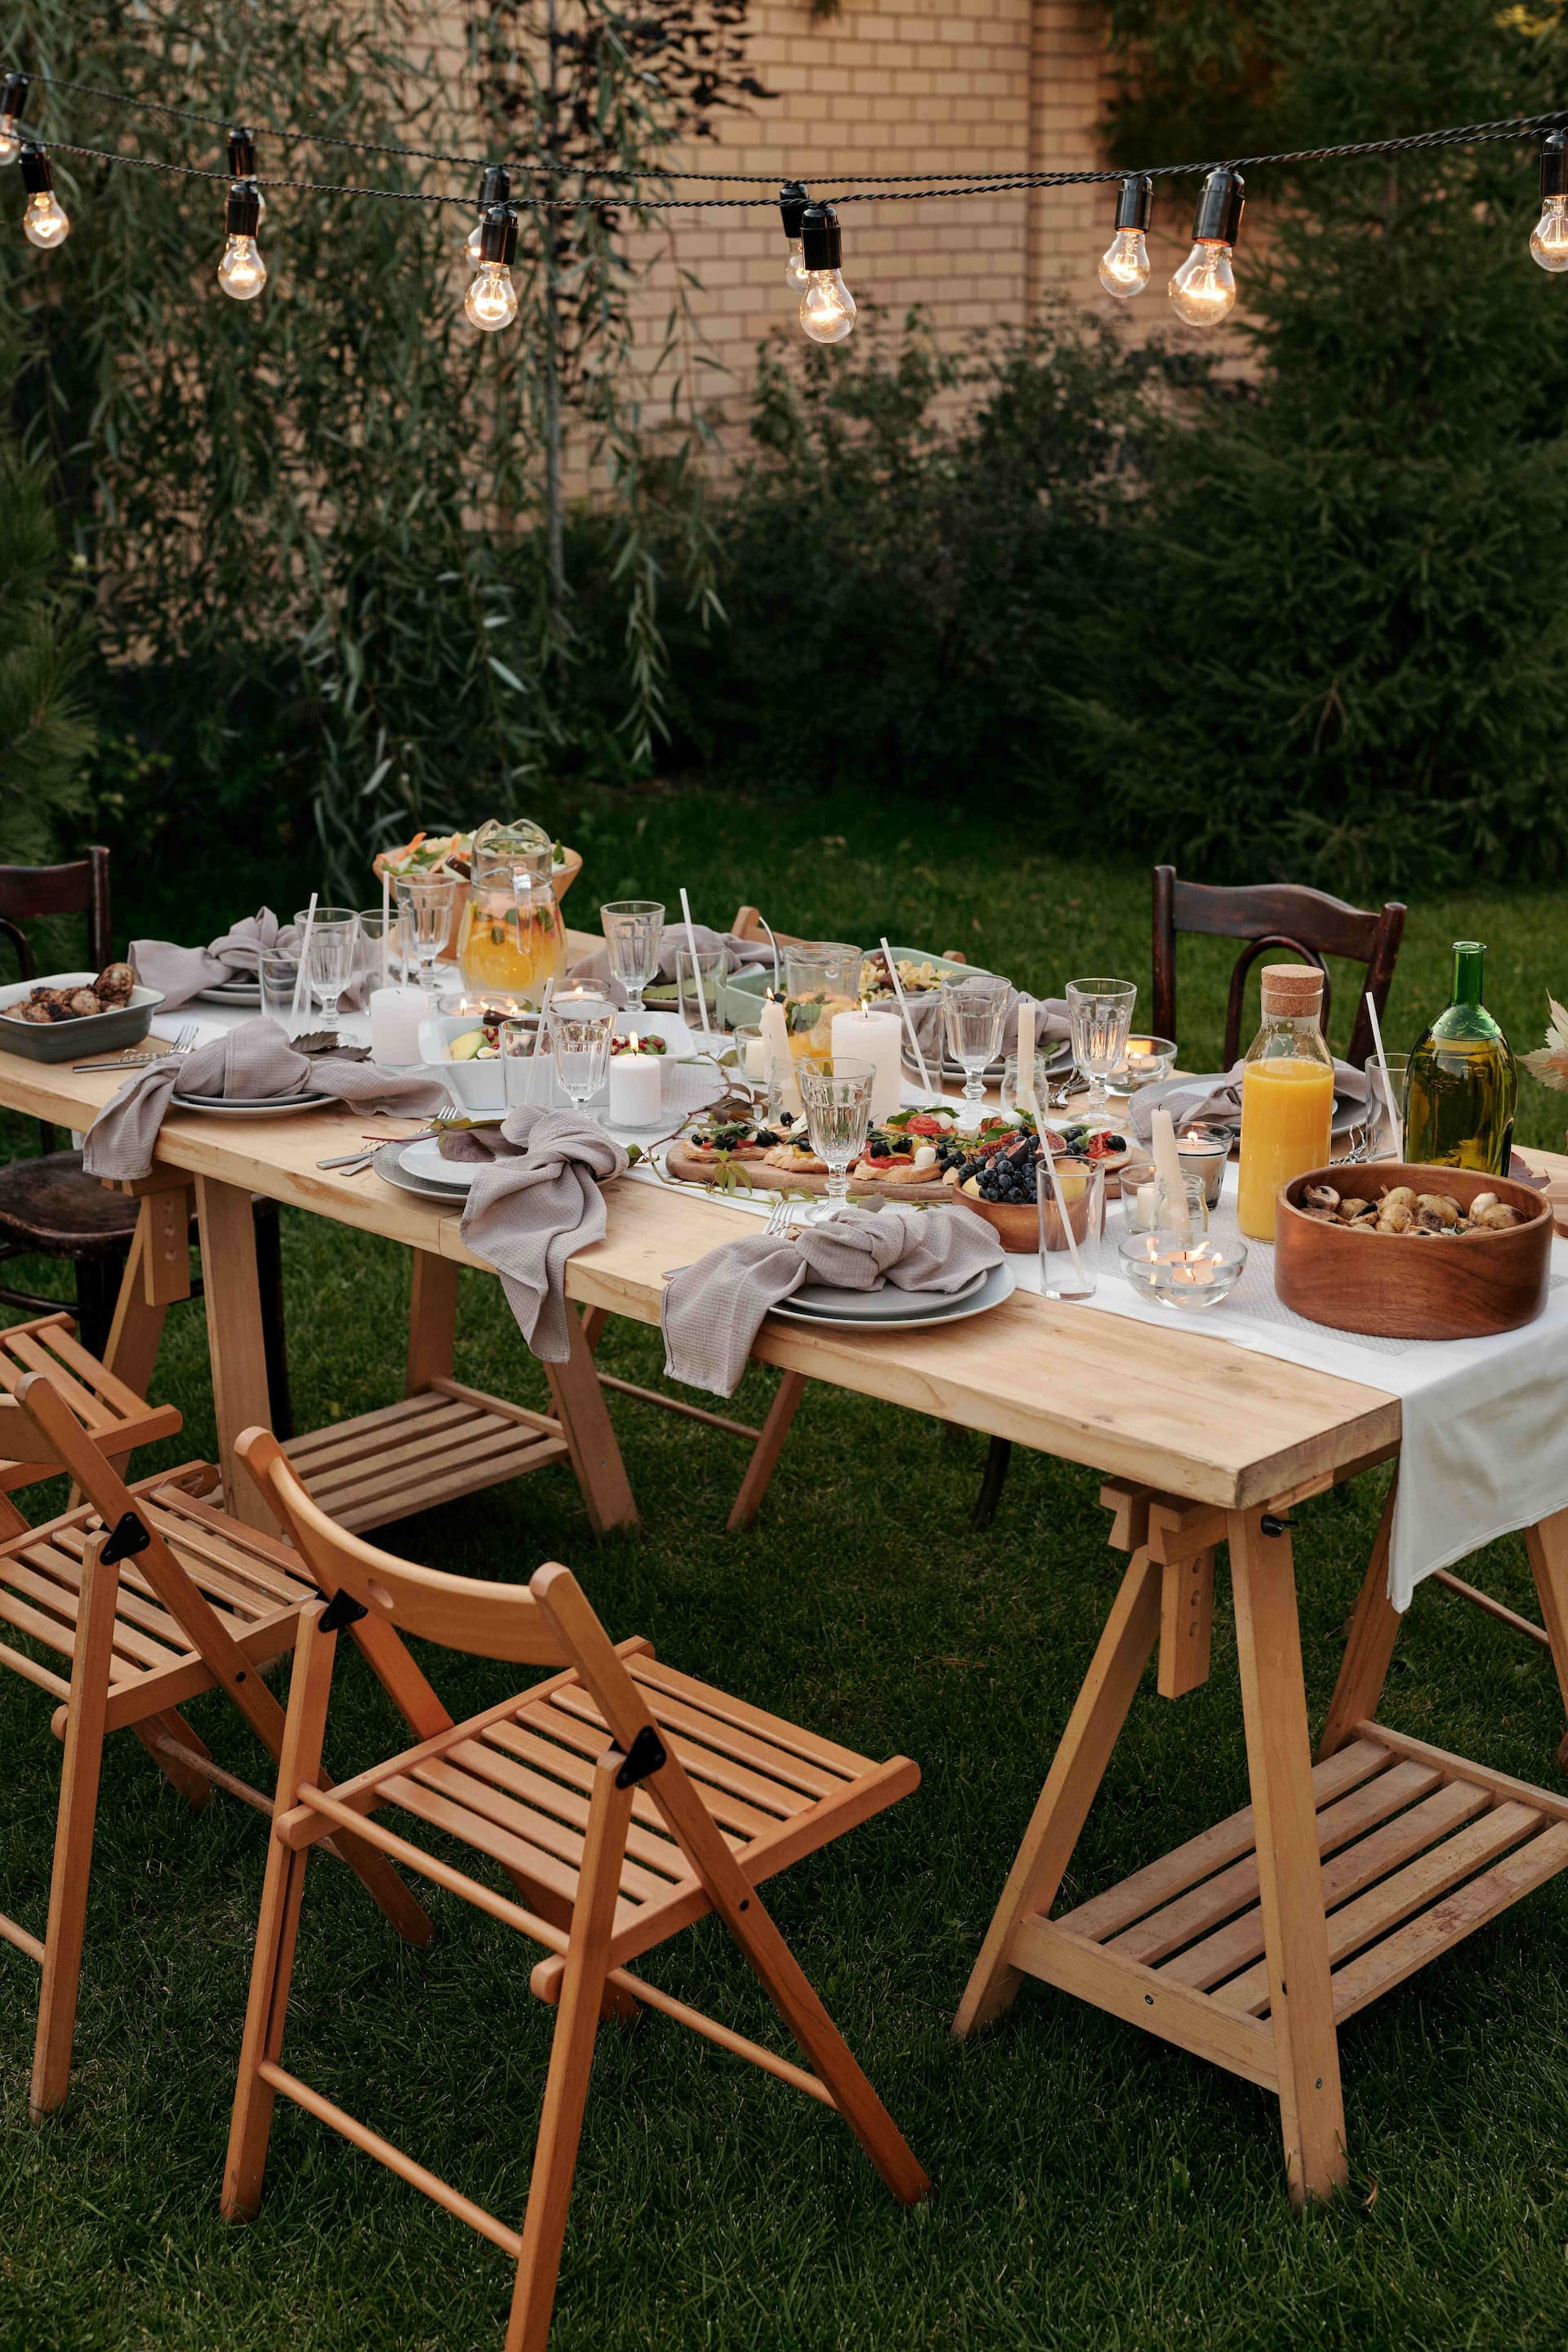 Hosting With Elegance: Mastering The Art Of A Sit Down Dinner